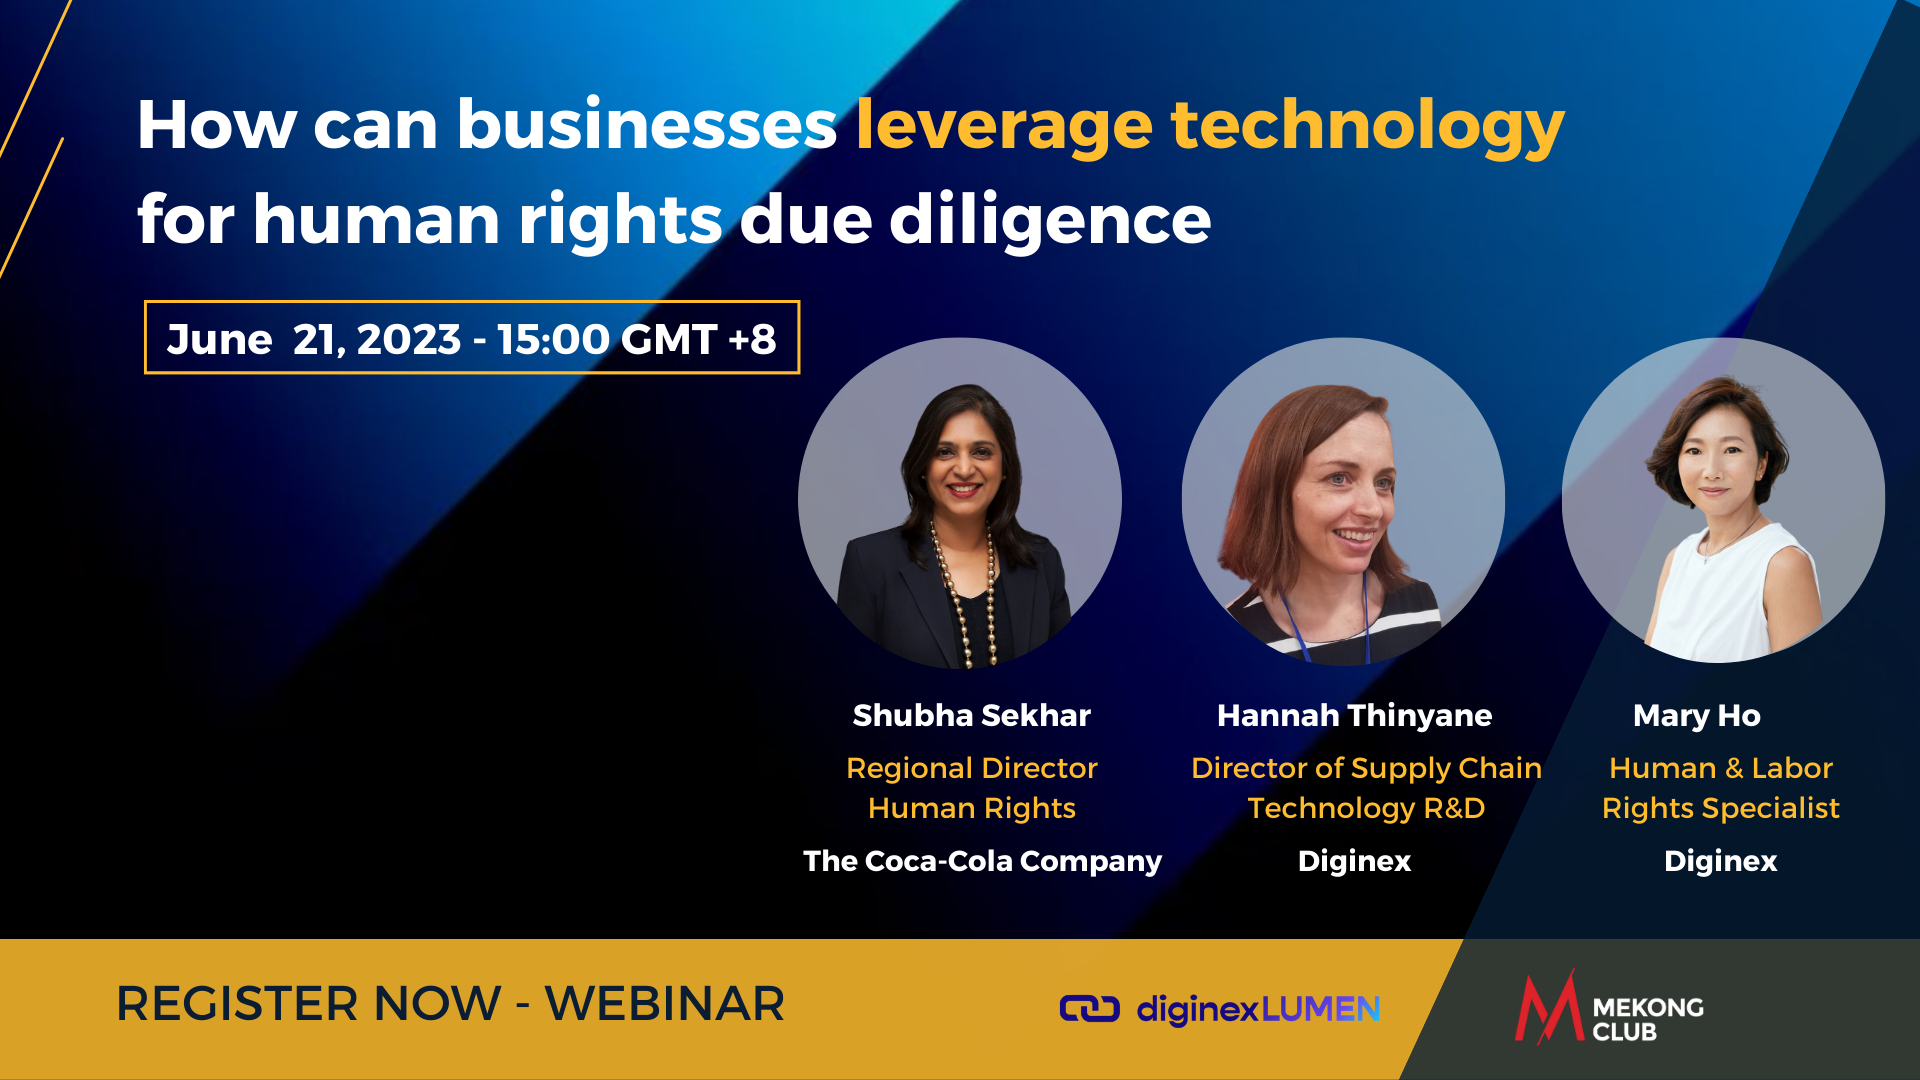 Webinar: How can businesses leverage technology for human rights due diligence